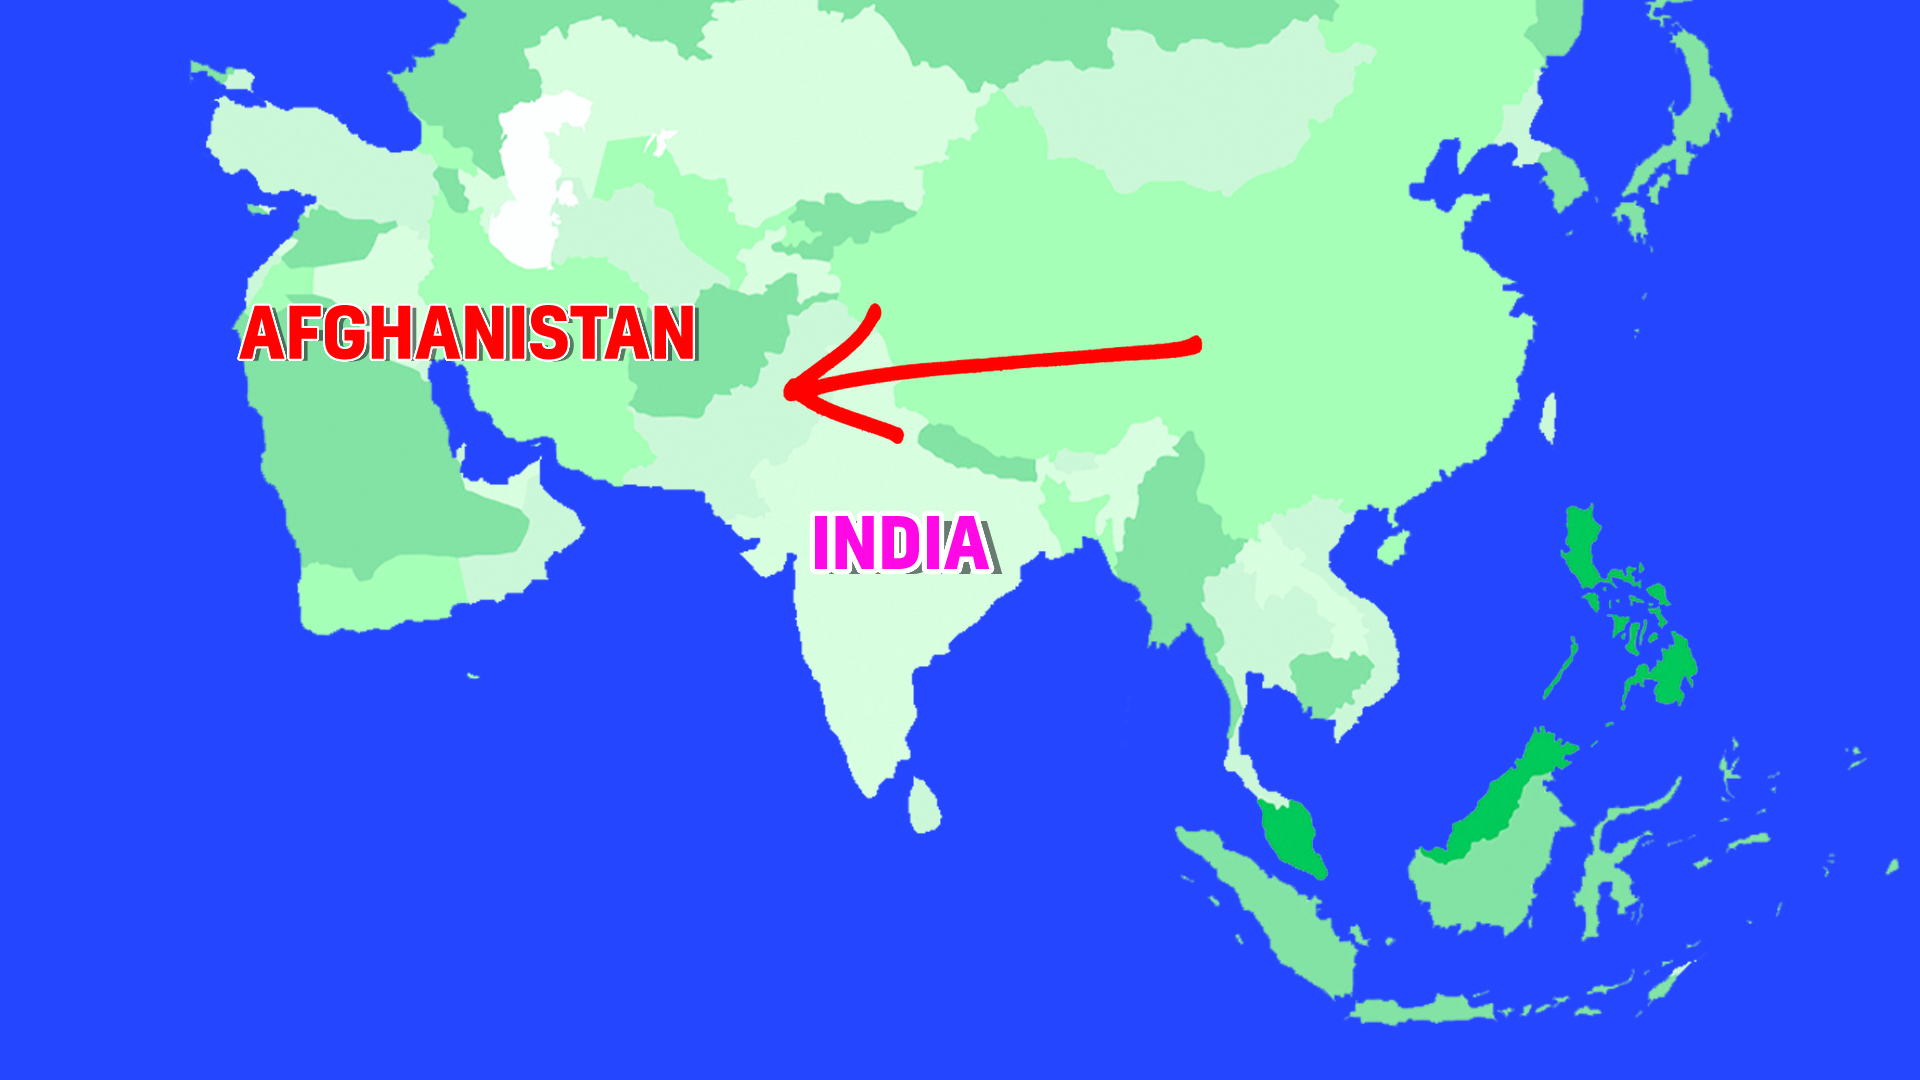 Which country is between Afghanistan and India?